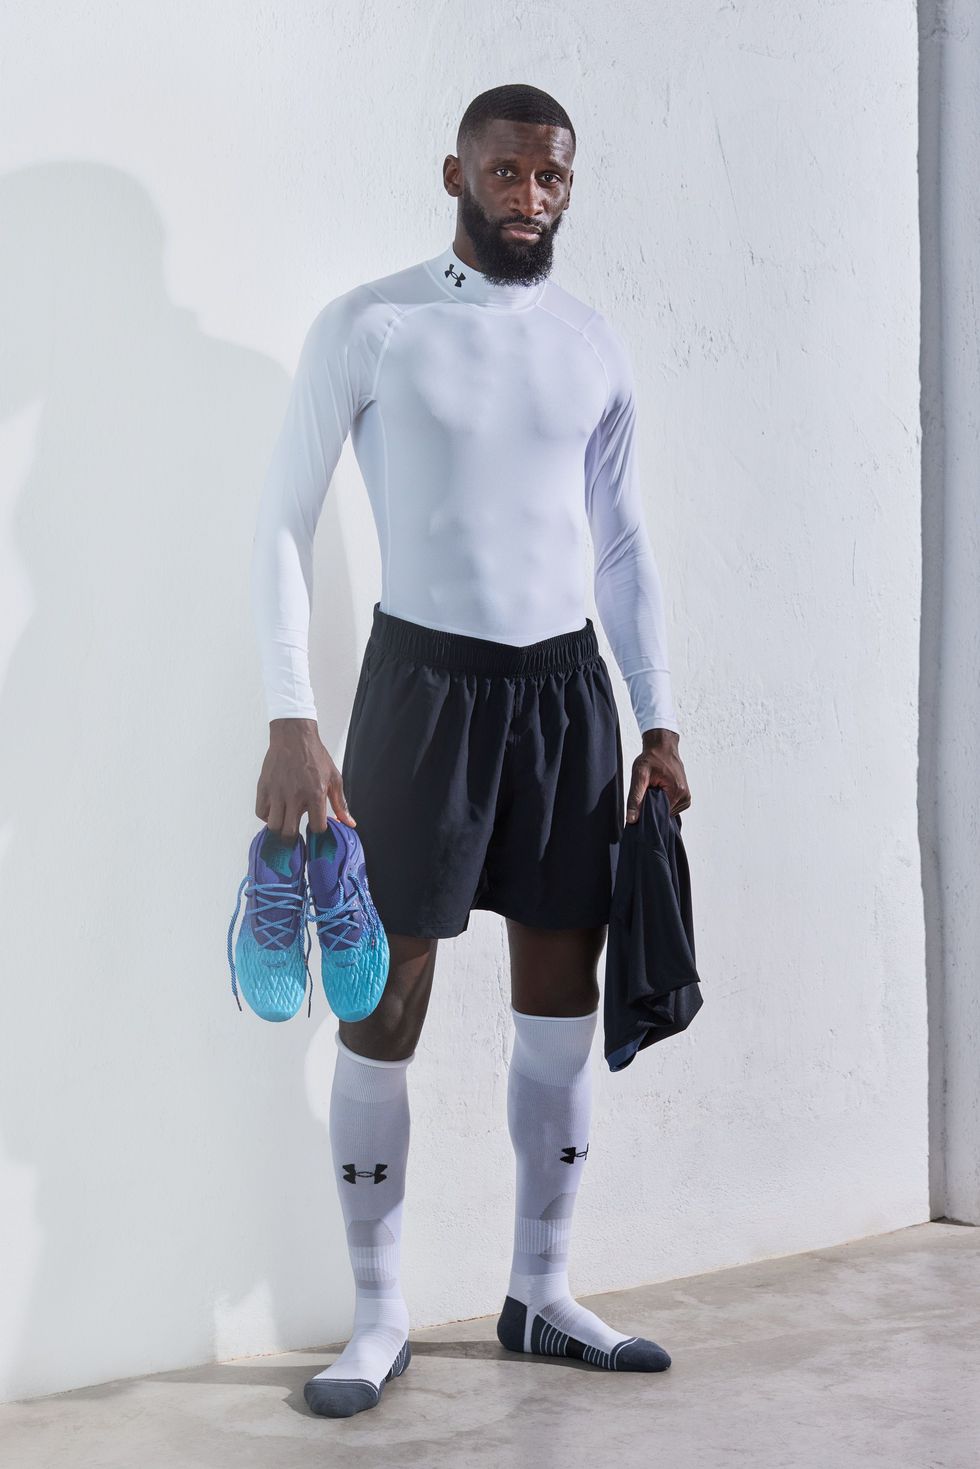 Under Armour's ColdGear compression mock is my favorite winter